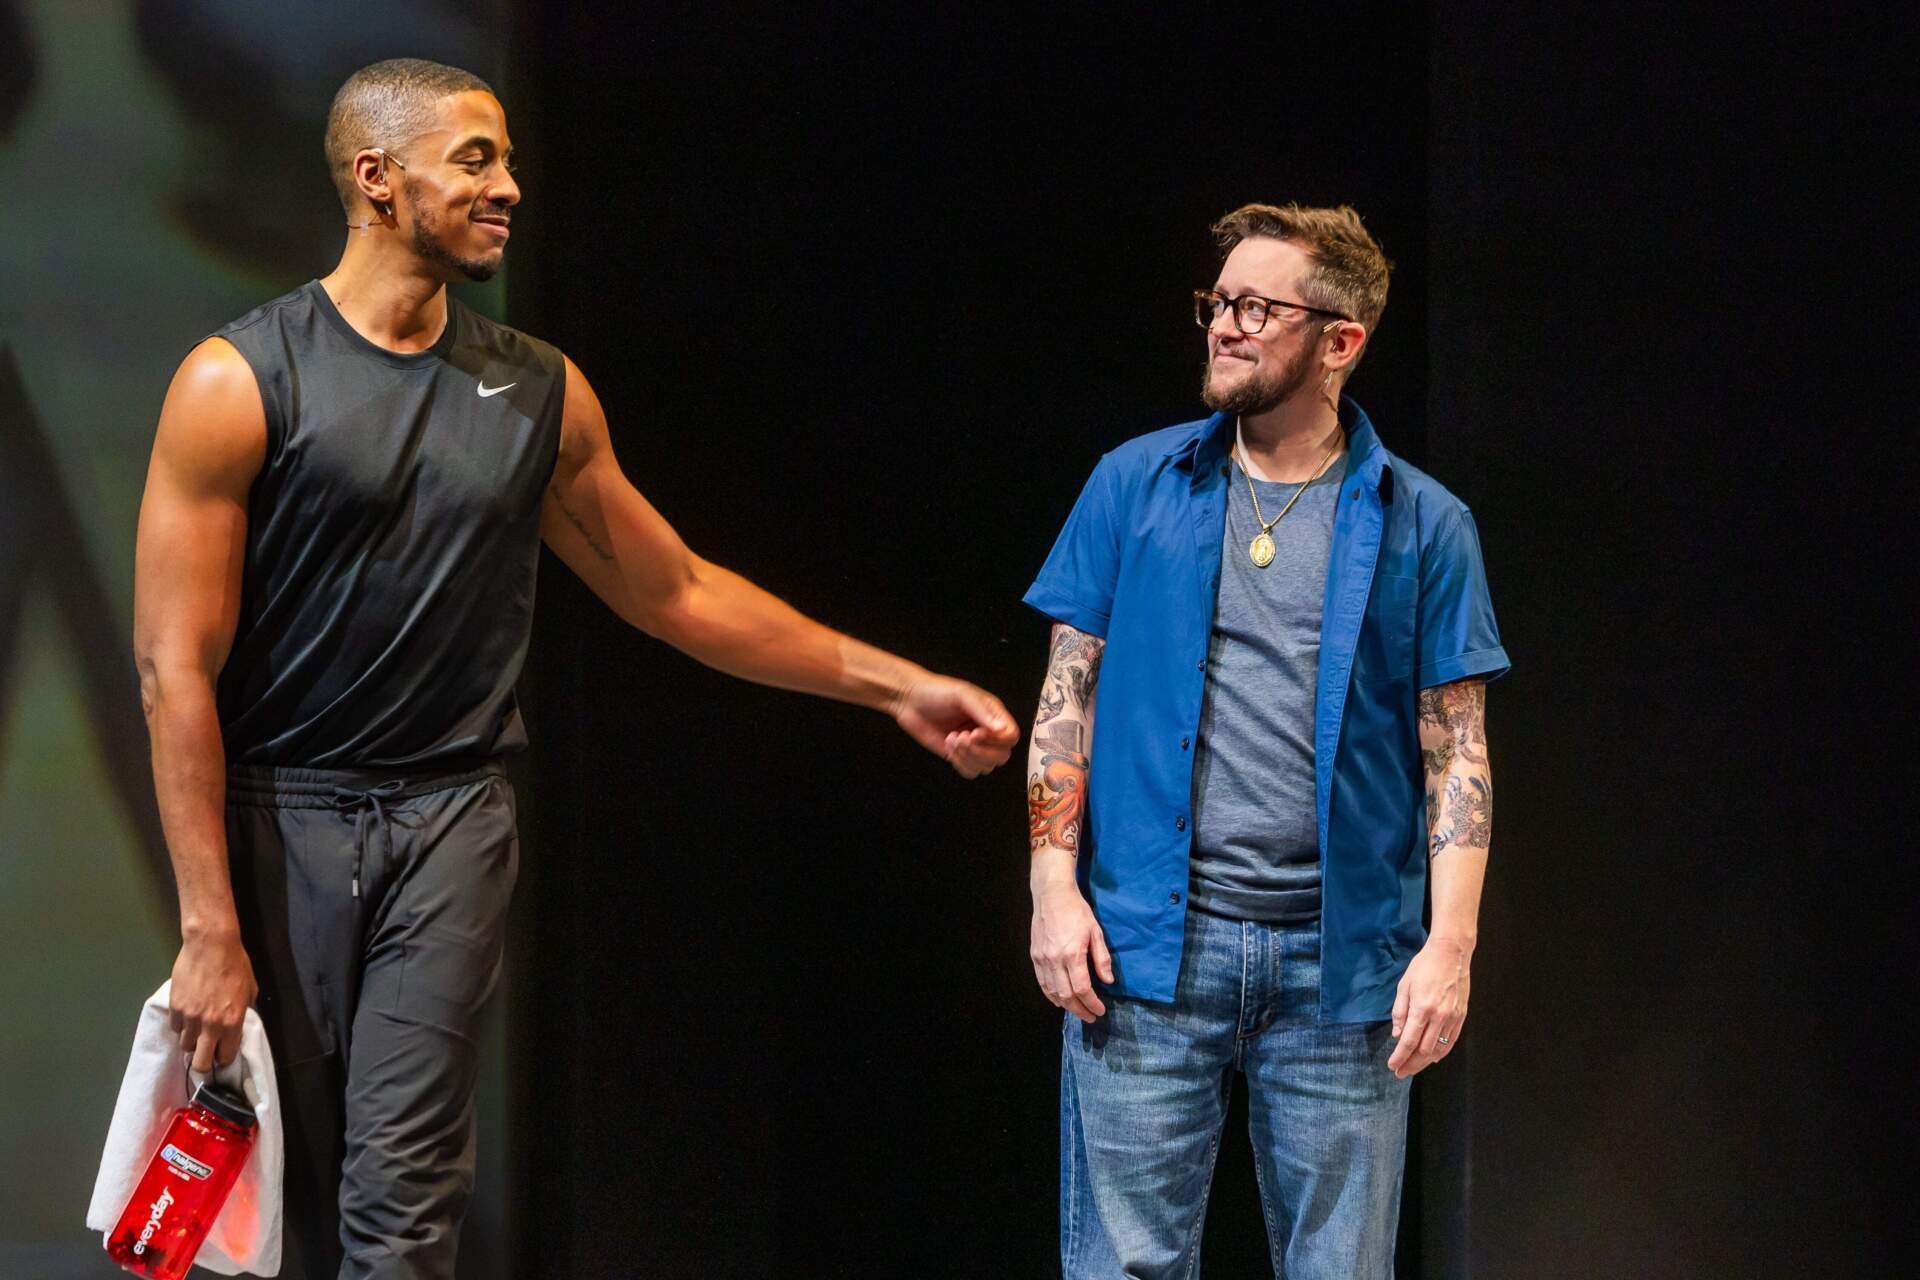 Justiin A. Davis and Petey Gibson in "Becoming a Man" at the American Repertory Theater. (Courtesy Nile Scott Studios and Maggie Hall)